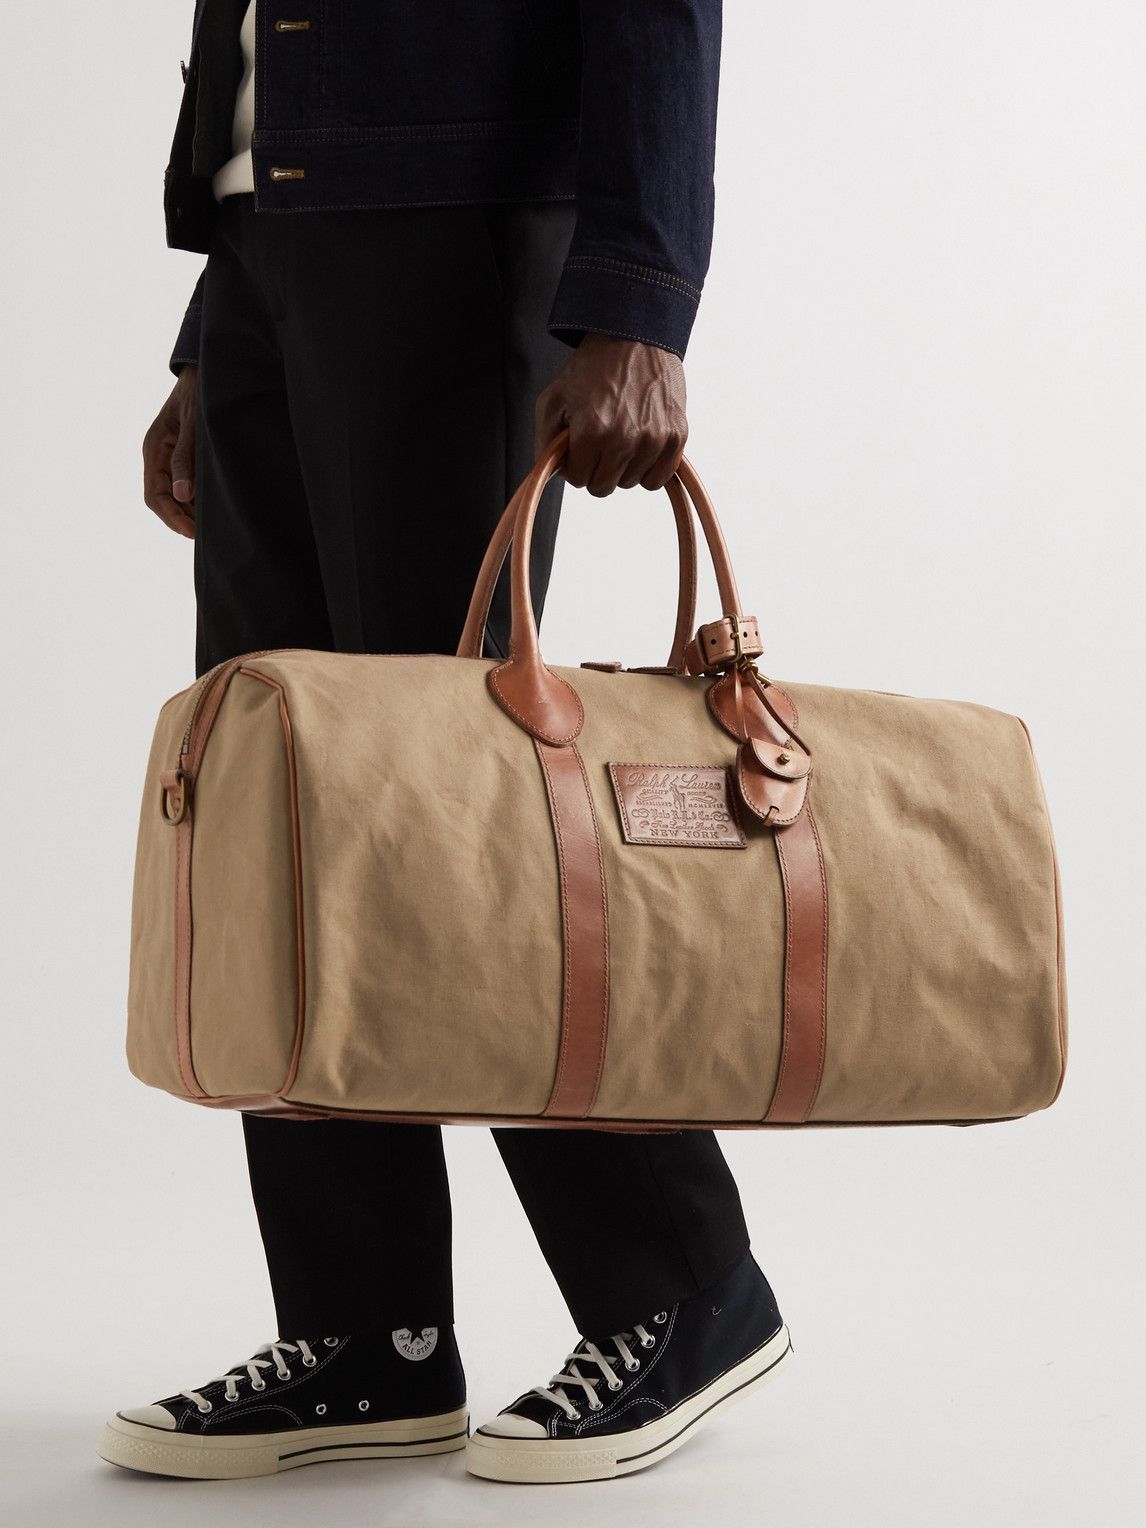 Polo Ralph Lauren - Leather-Trimmed Canvas Weekend Bag